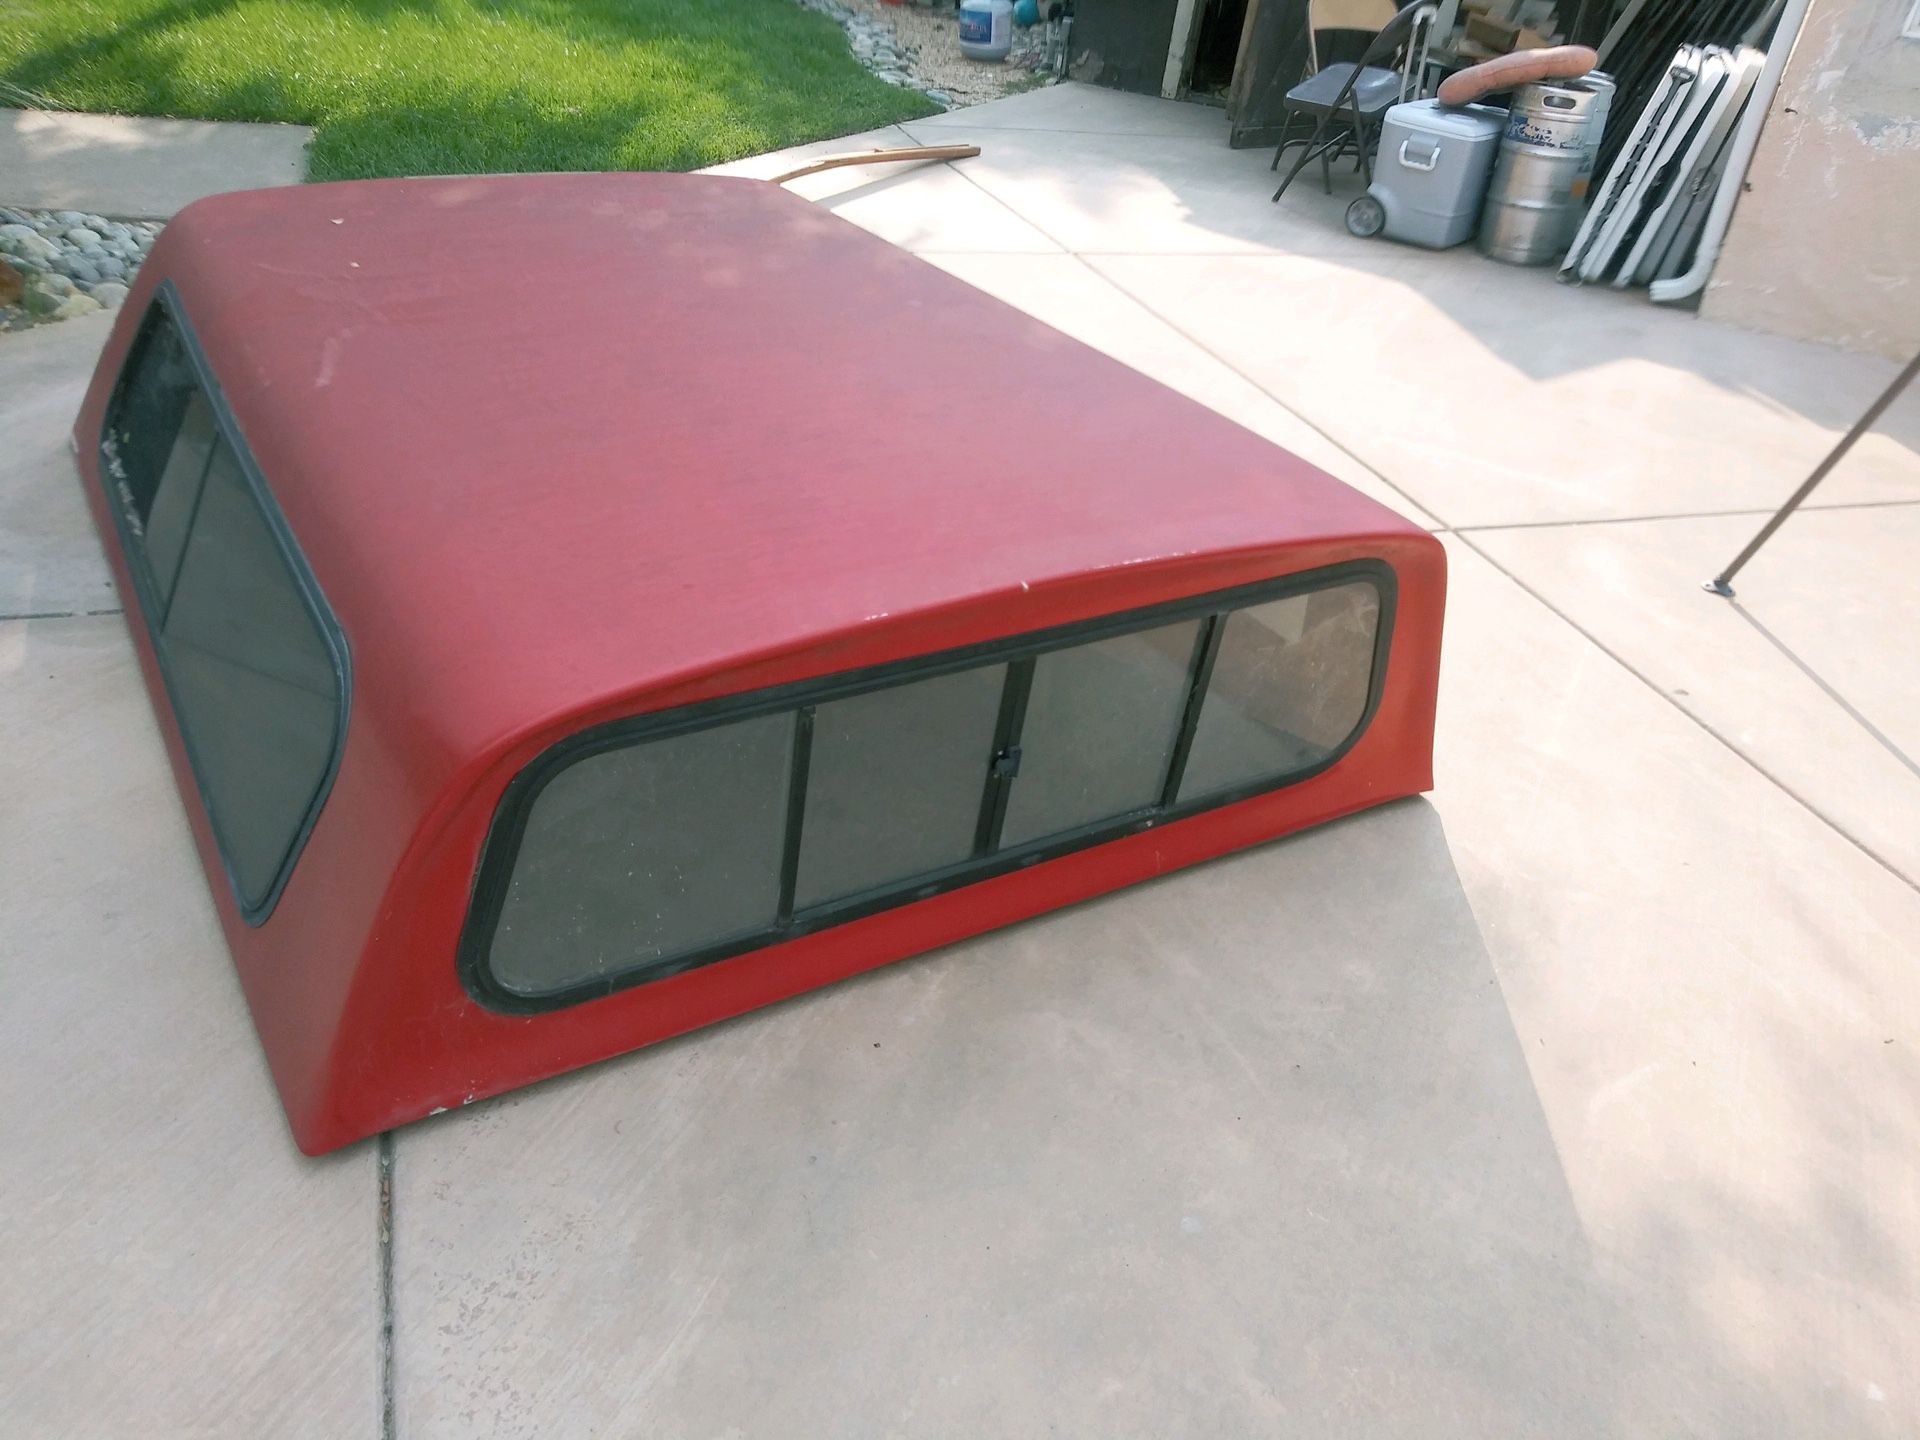 FREE Camper shell! Must be picked up by tomorrow 7/31